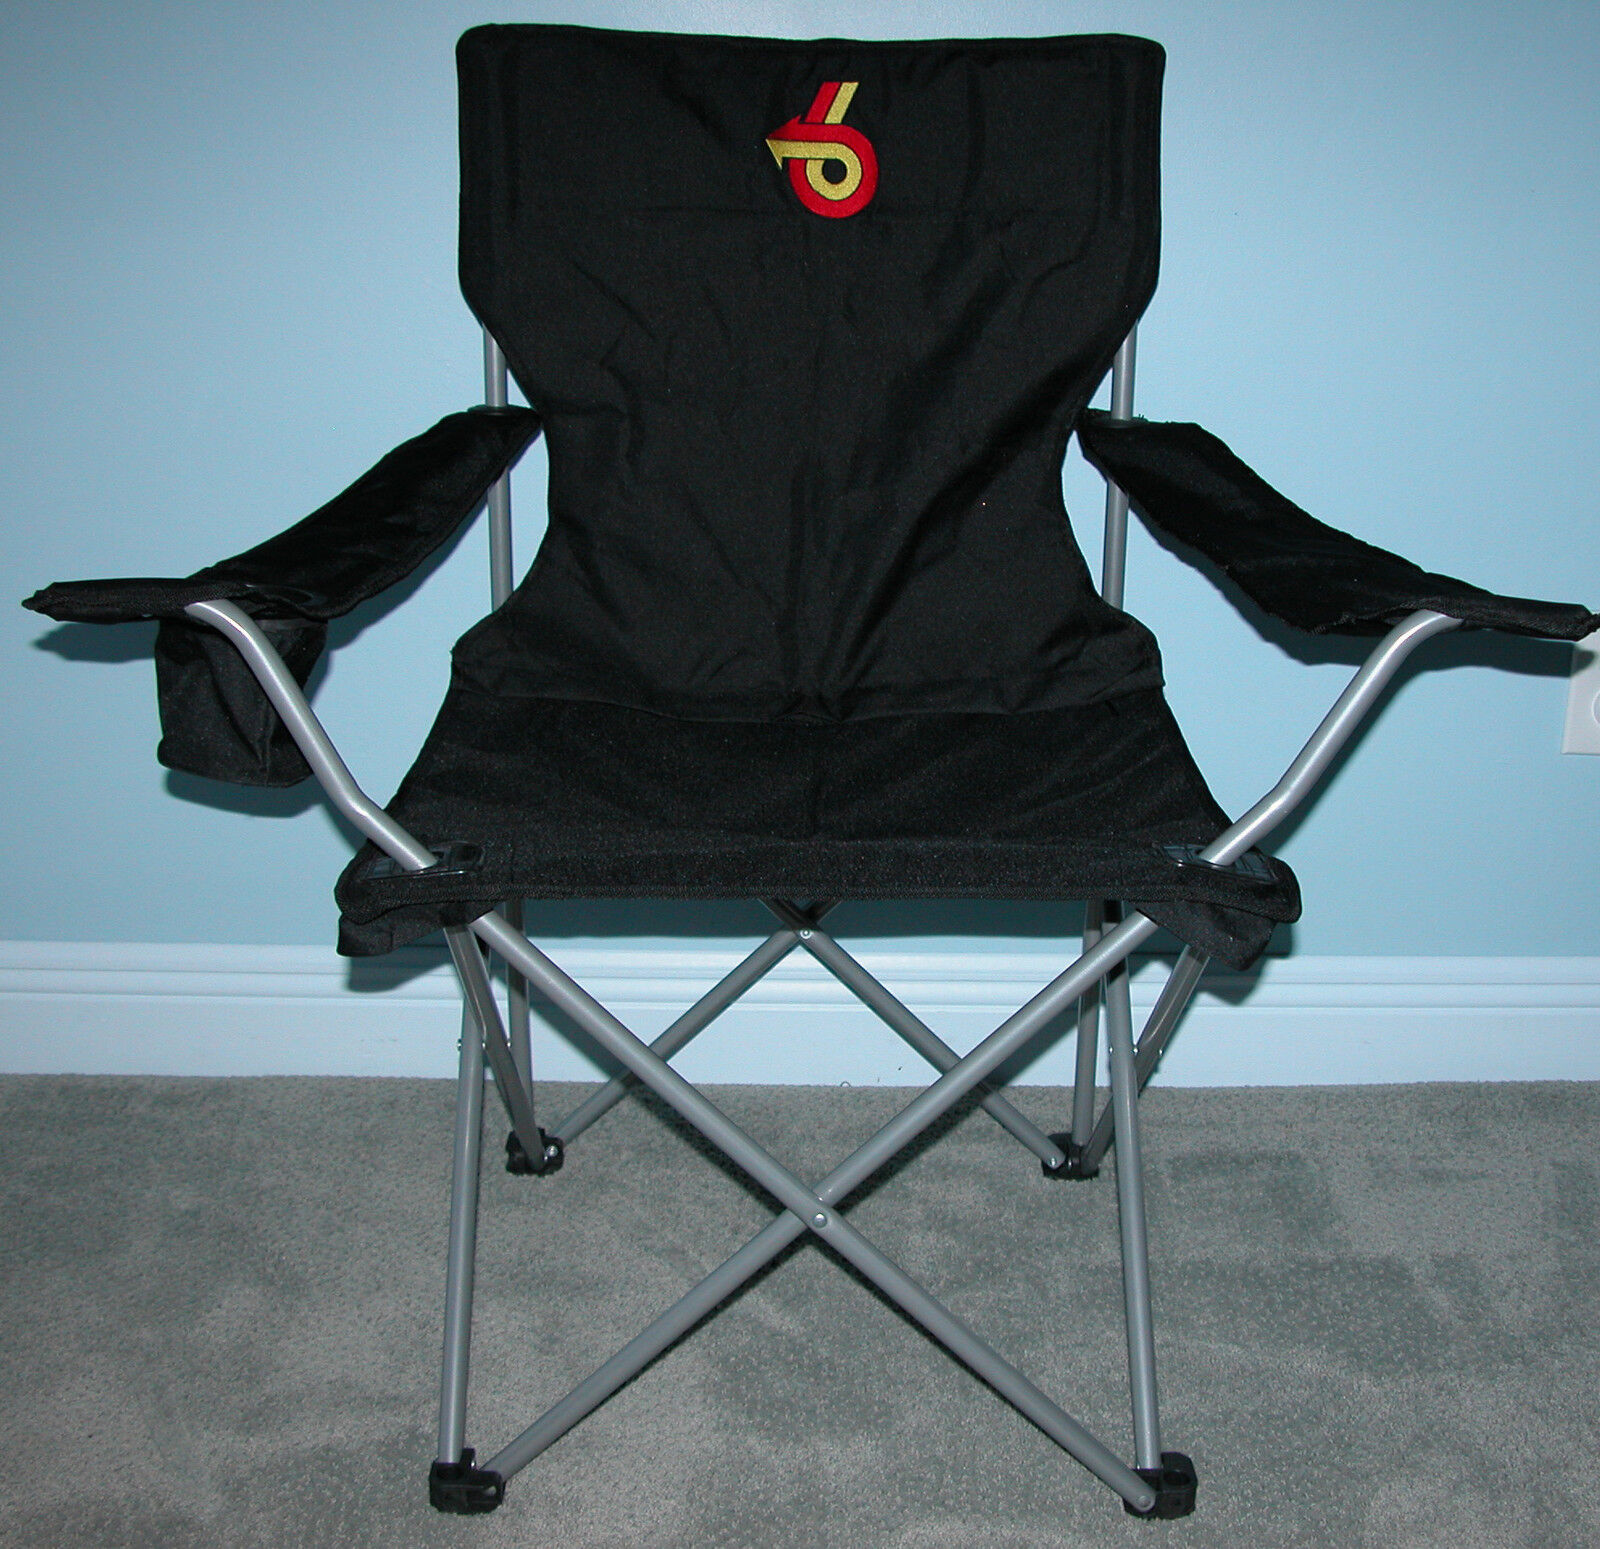 Buick Grand National Chair with Embroidered Power 6 on Front